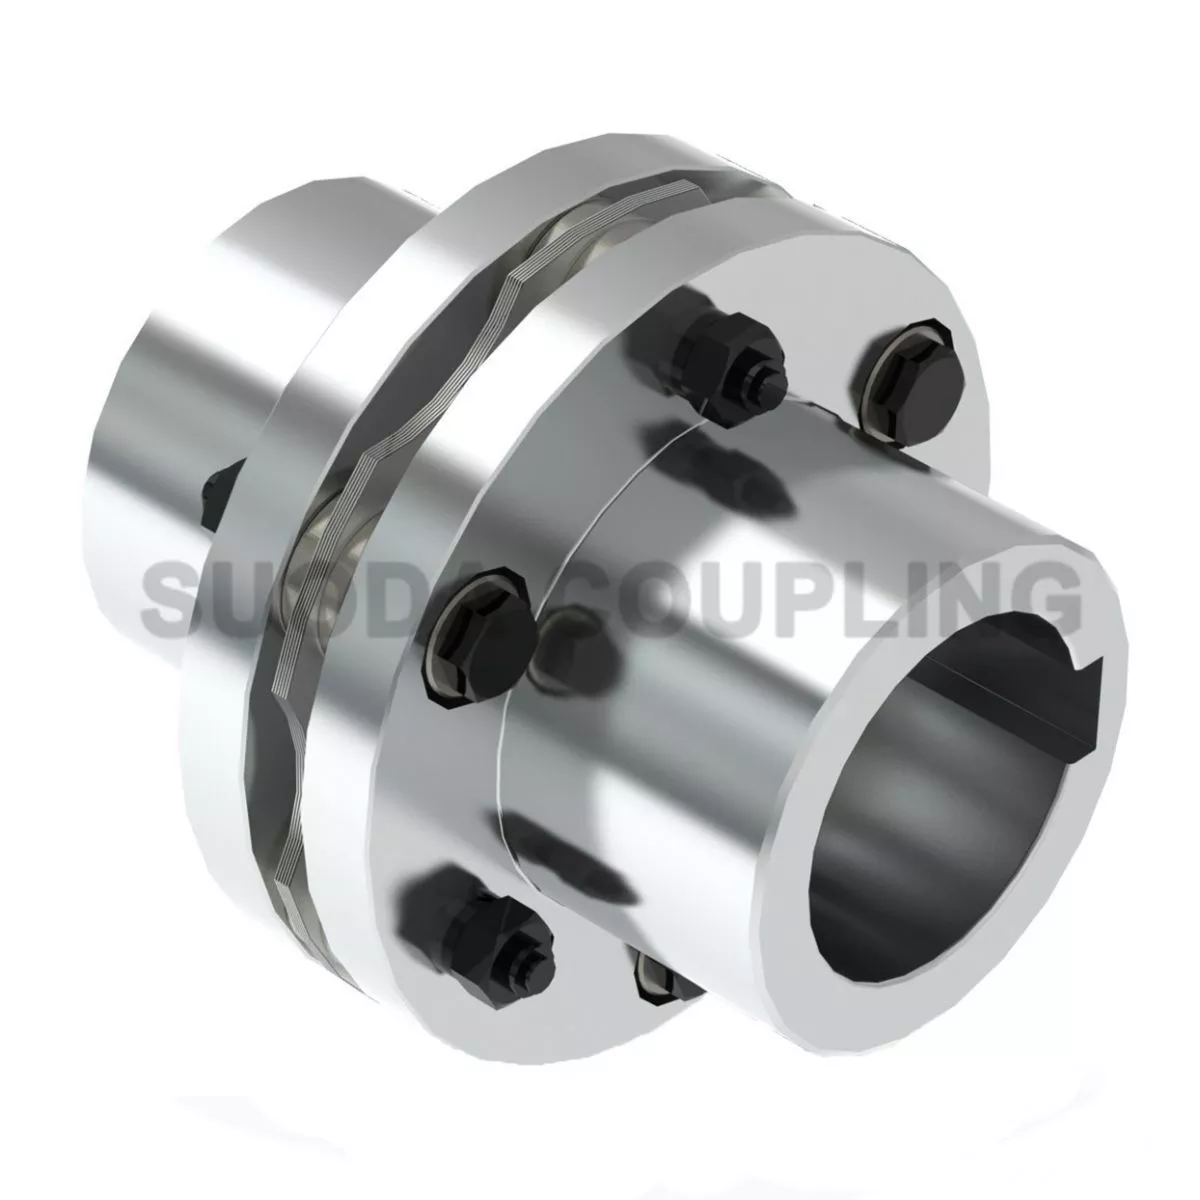 Structural Types of Disc Couplings